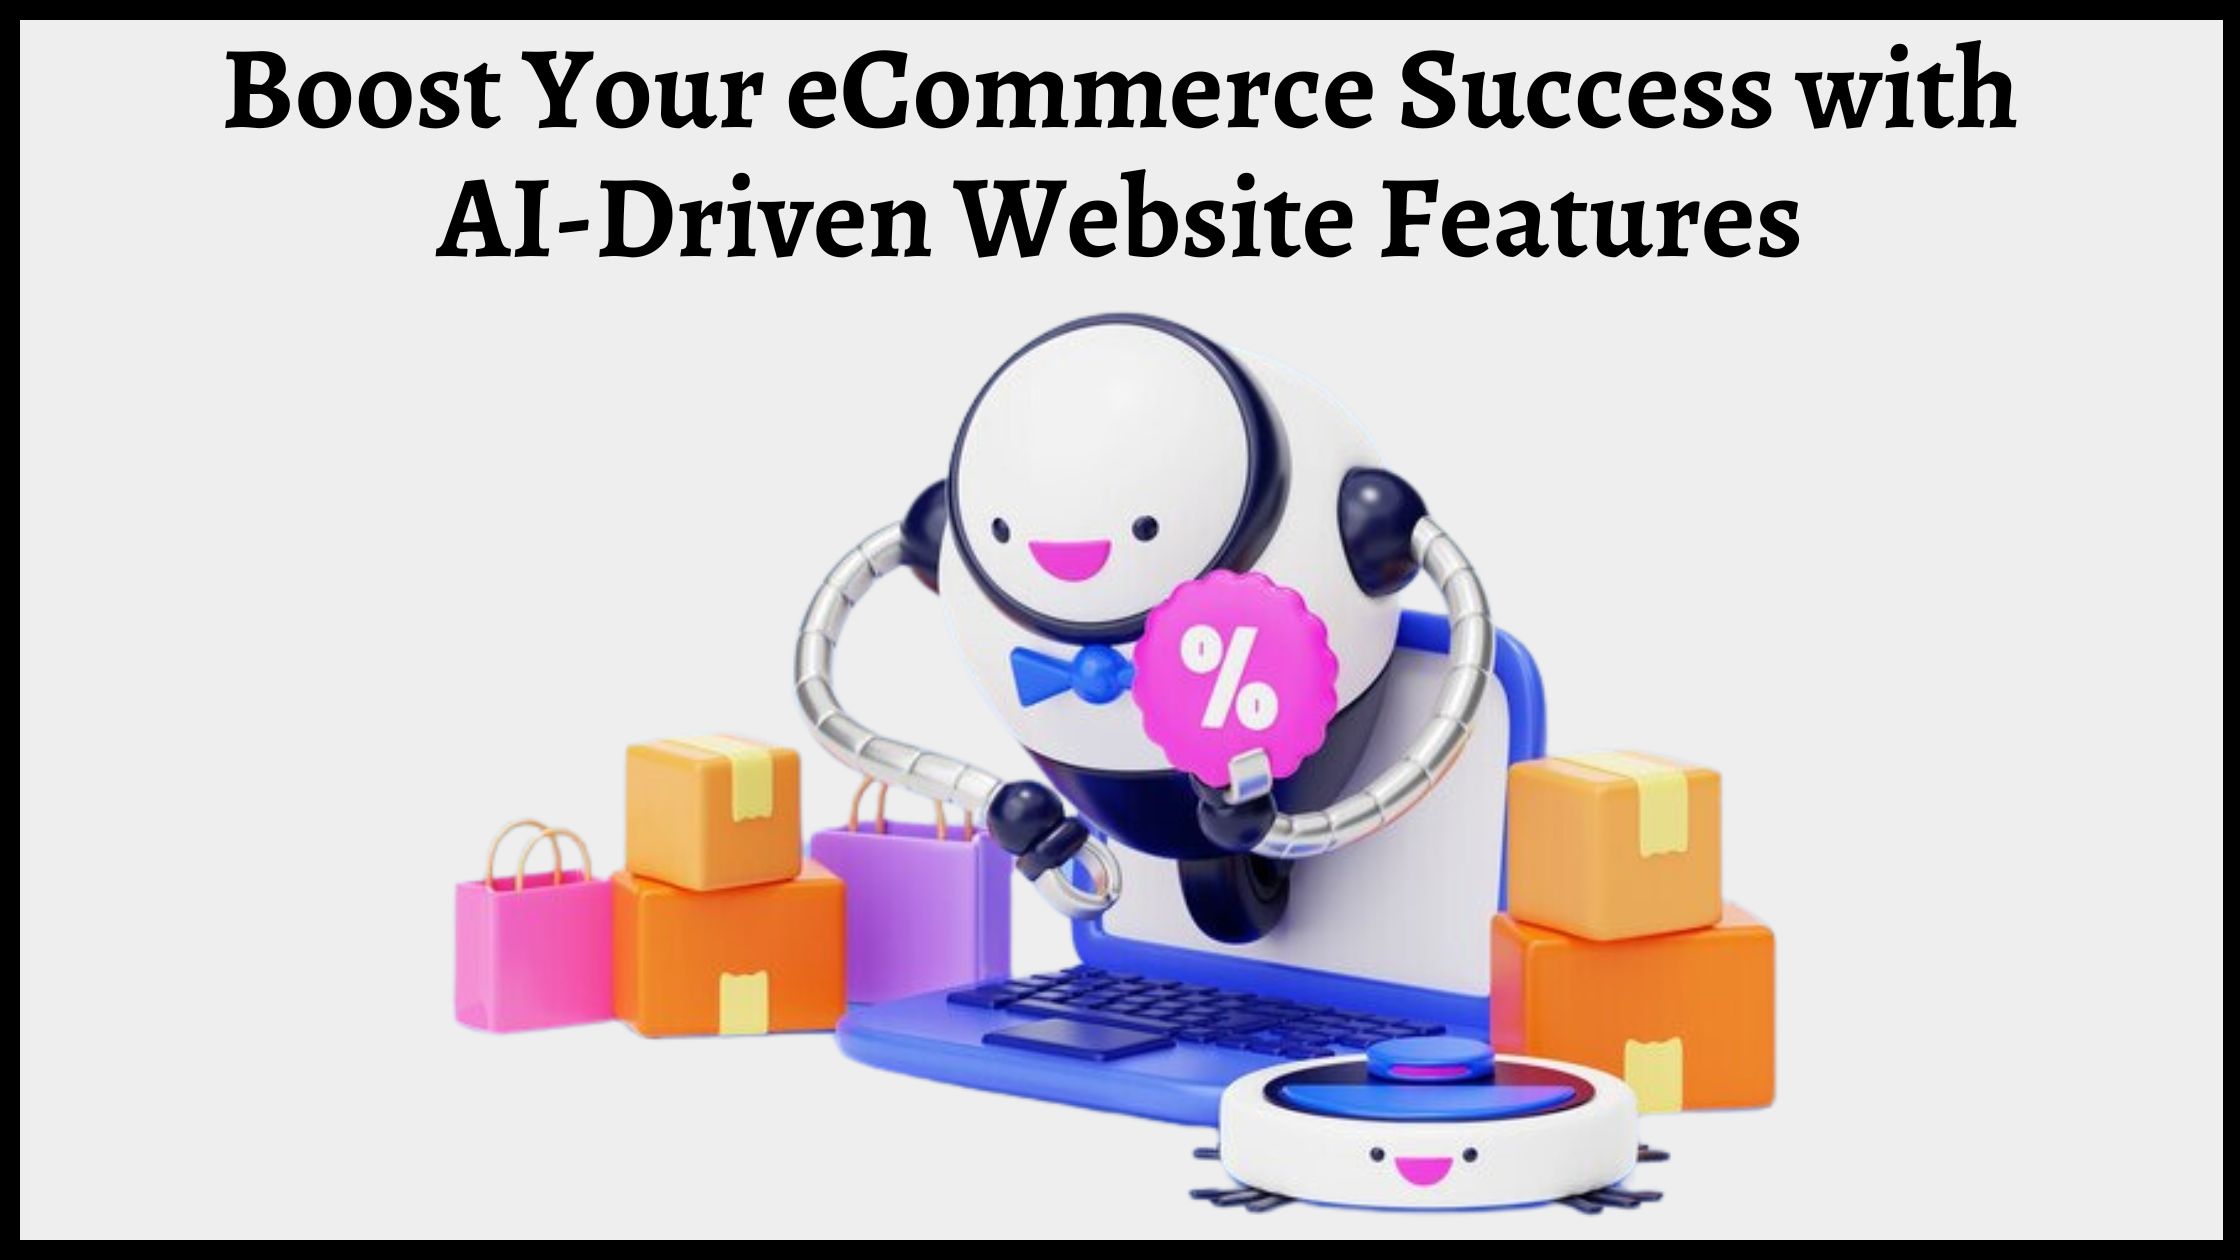 Boost Your eCommerce Success with AI-Driven Website Features